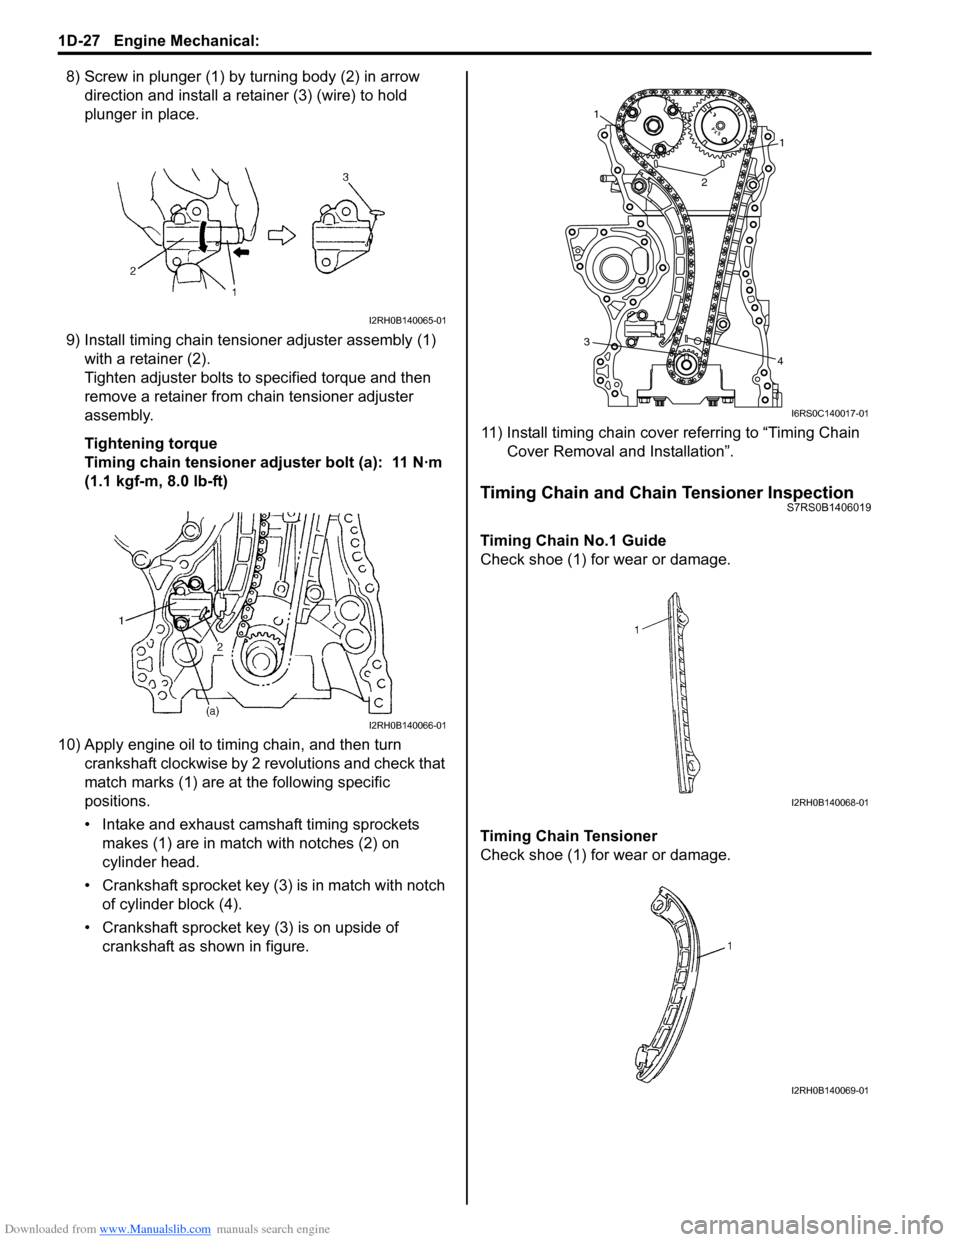 SUZUKI SWIFT 2006 2.G Service Workshop Manual Downloaded from www.Manualslib.com manuals search engine 1D-27 Engine Mechanical: 
8) Screw in plunger (1) by turning body (2) in arrow direction and install a reta iner (3) (wire) to hold 
plunger in